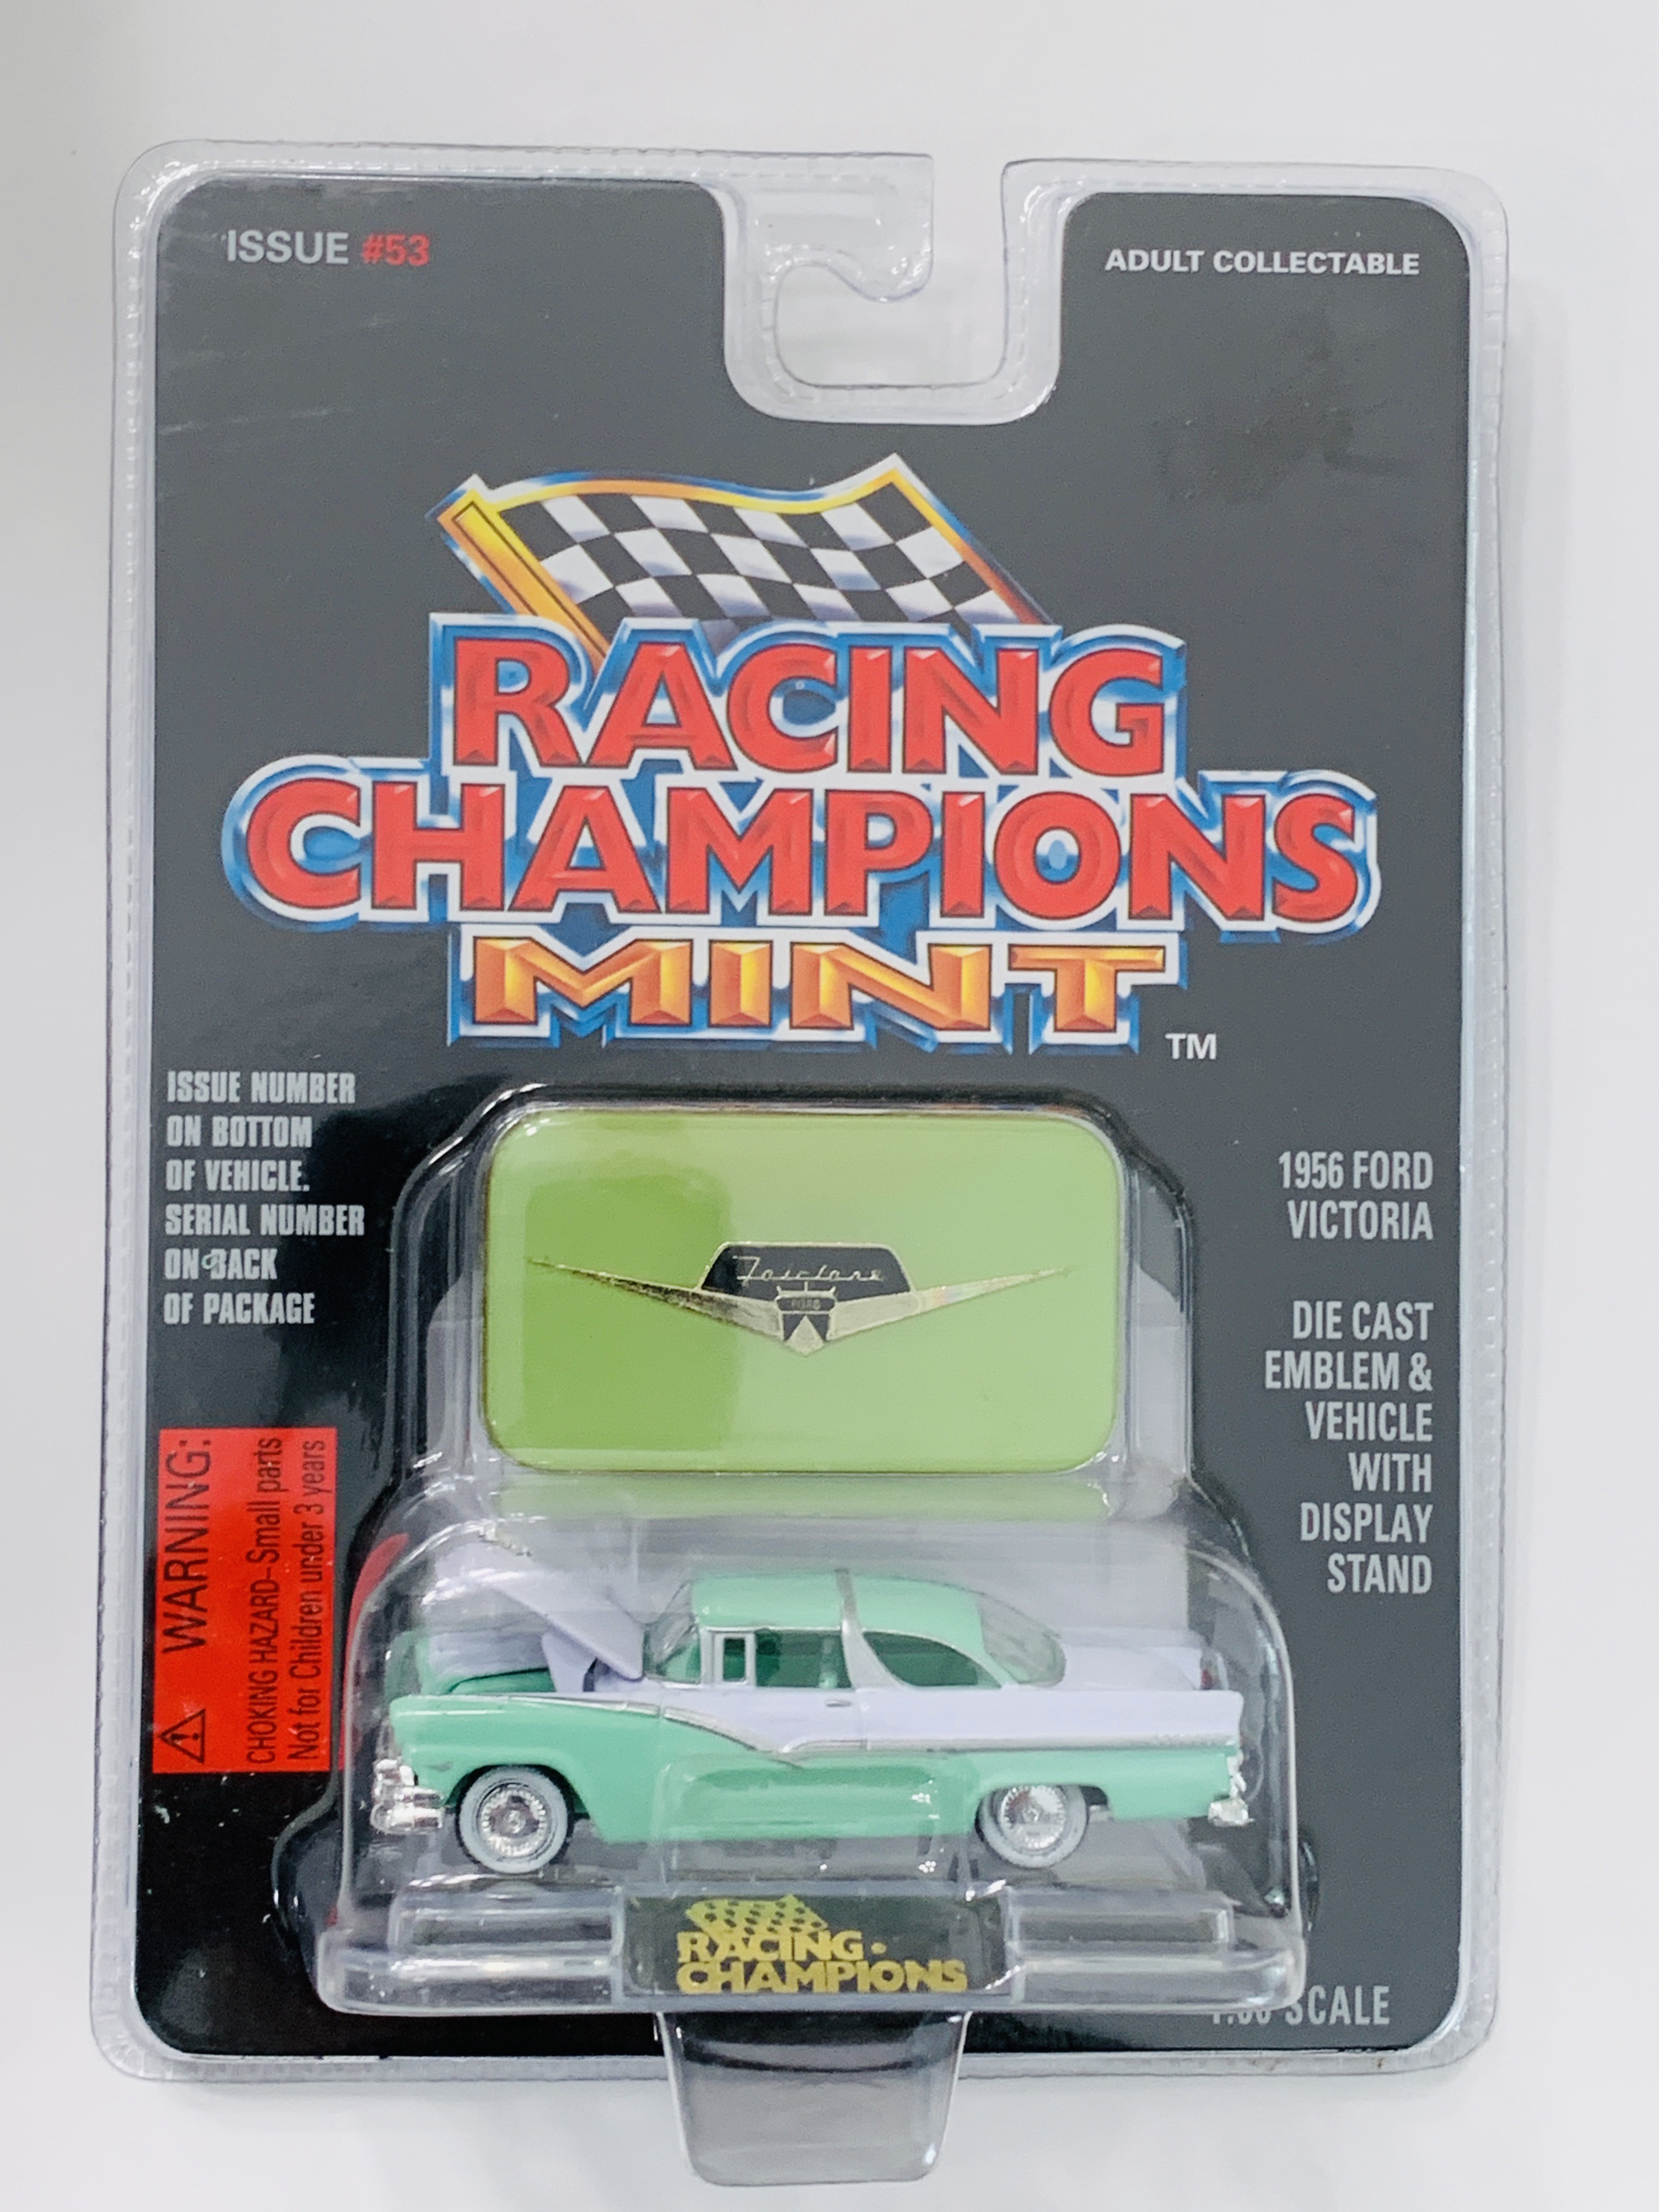 Racing Champions Mint Edition 1956 Ford Victoria